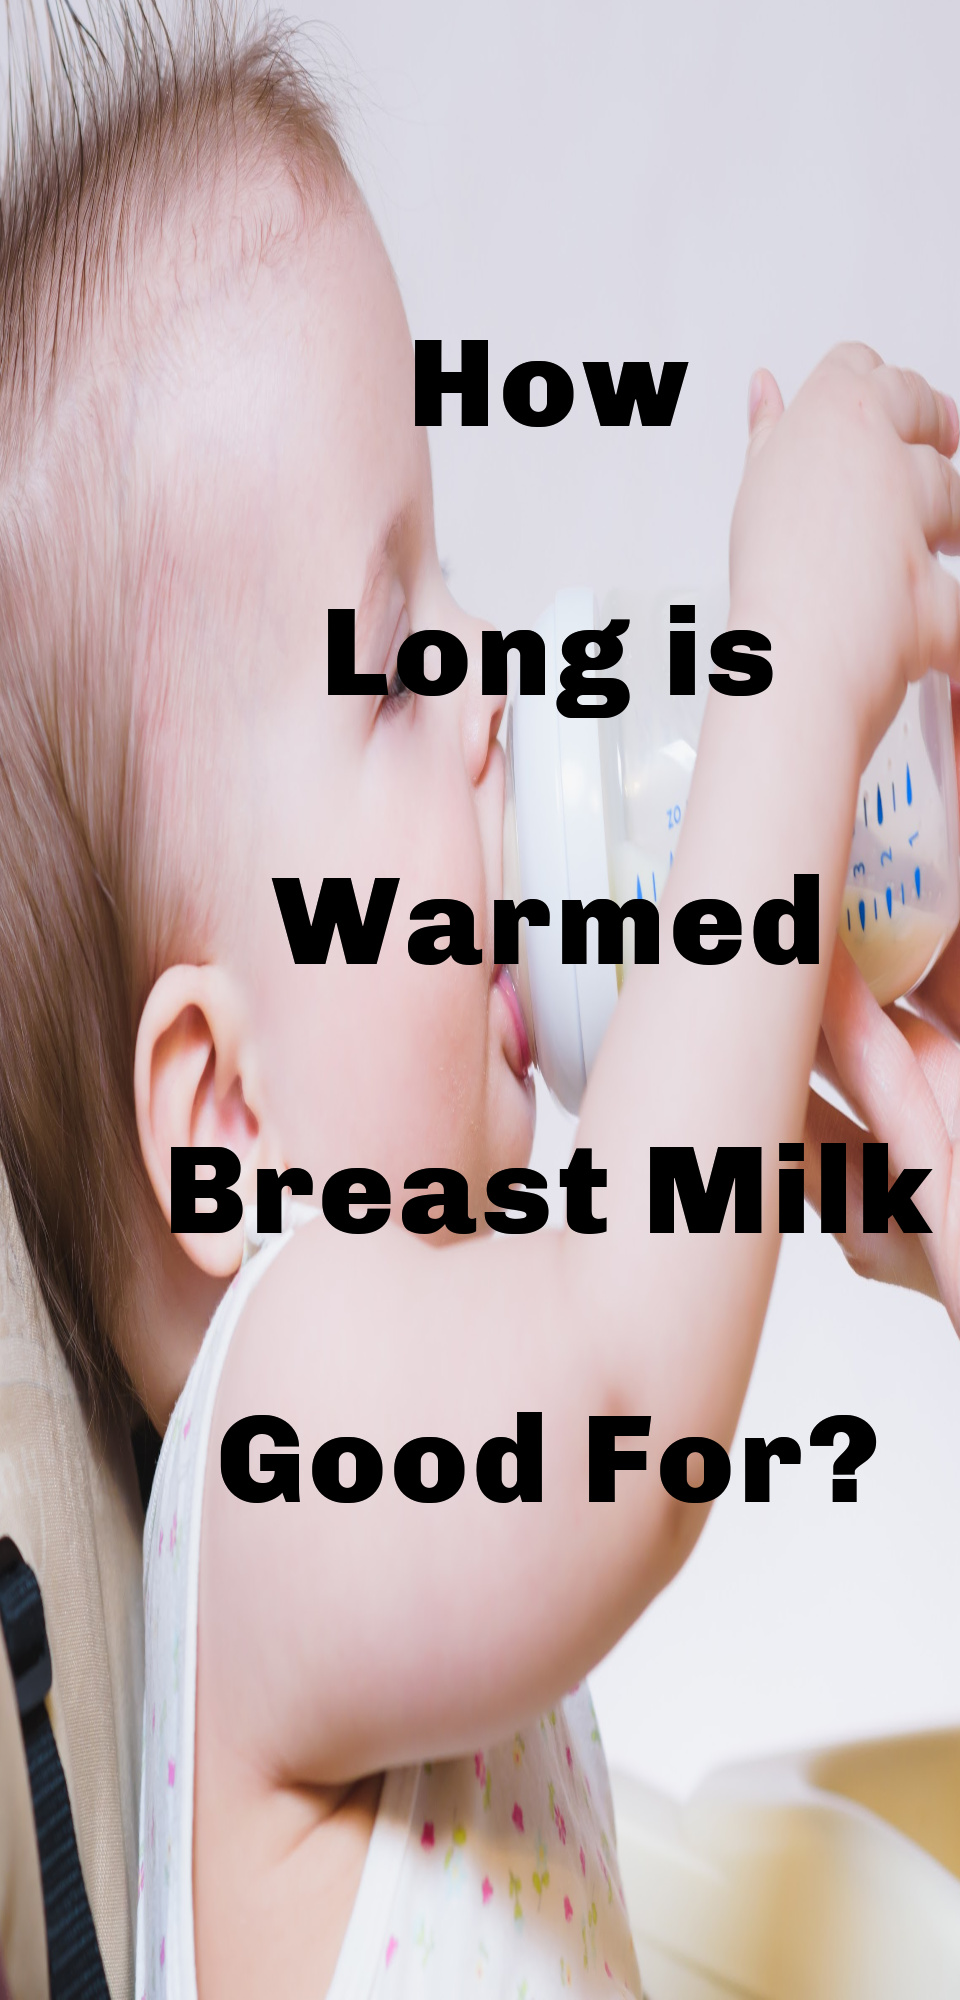 How Long Is Warmed Breastmilk Good For?